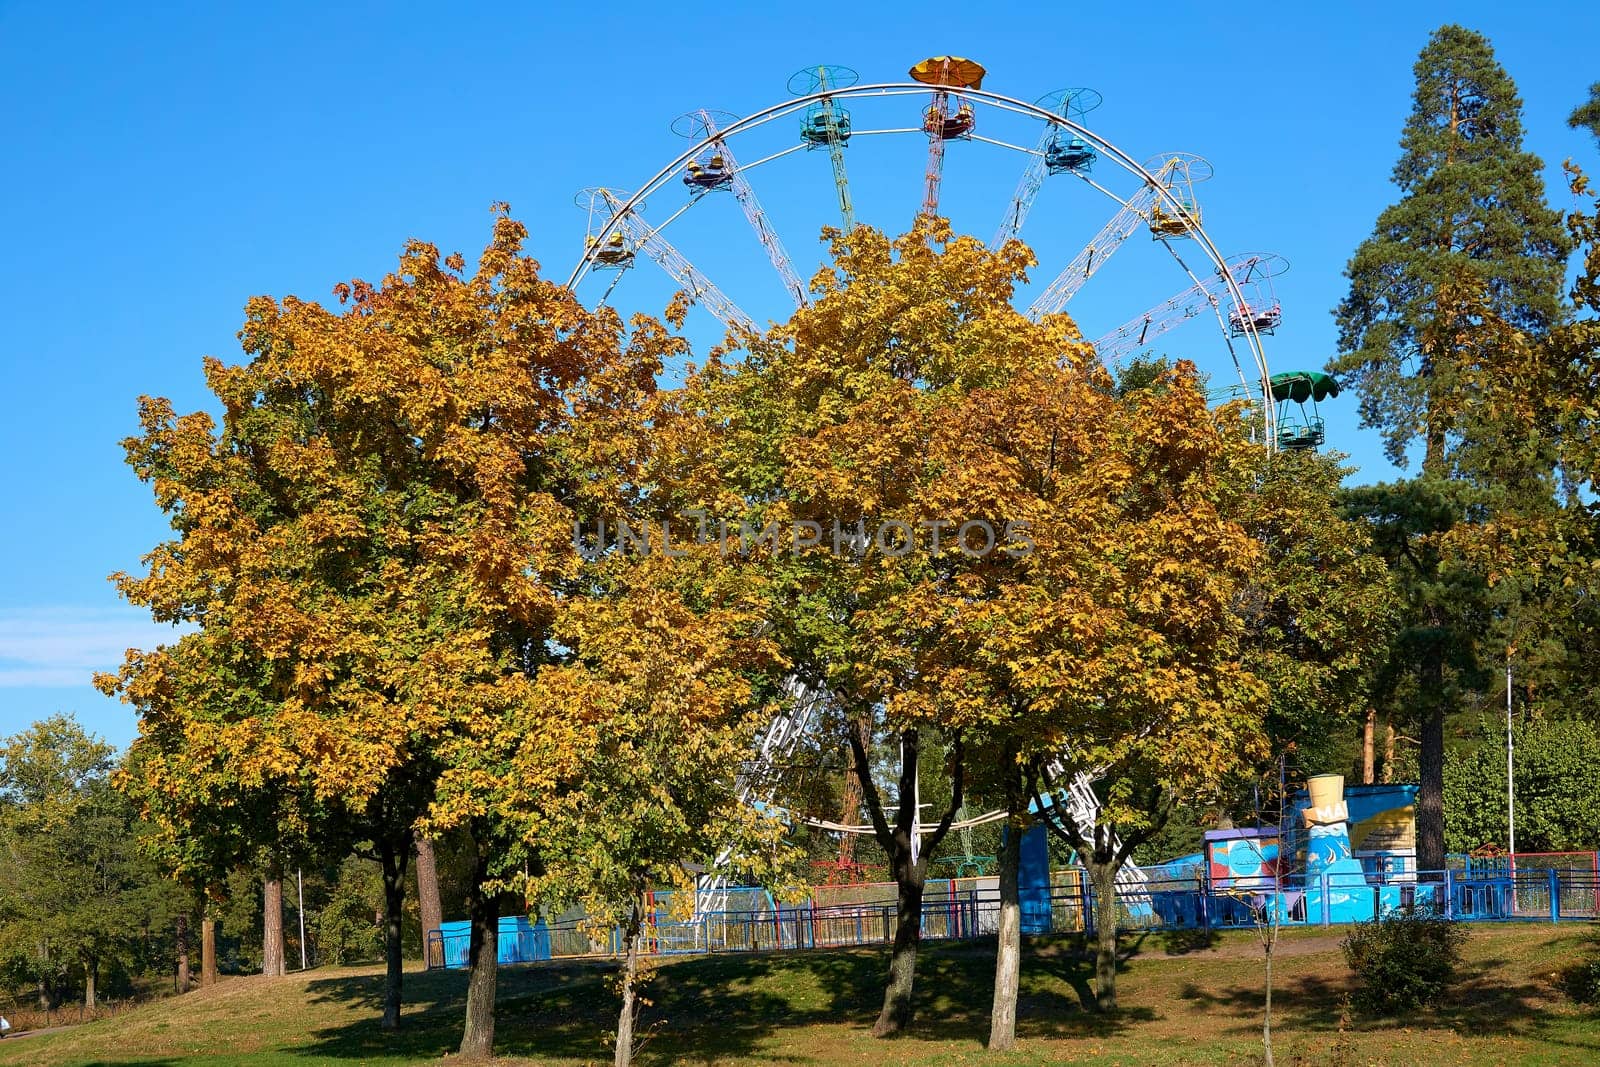 an amusement park or fairground ride consisting of a giant vertical revolving wheel with passenger cars suspended on its outer edge.